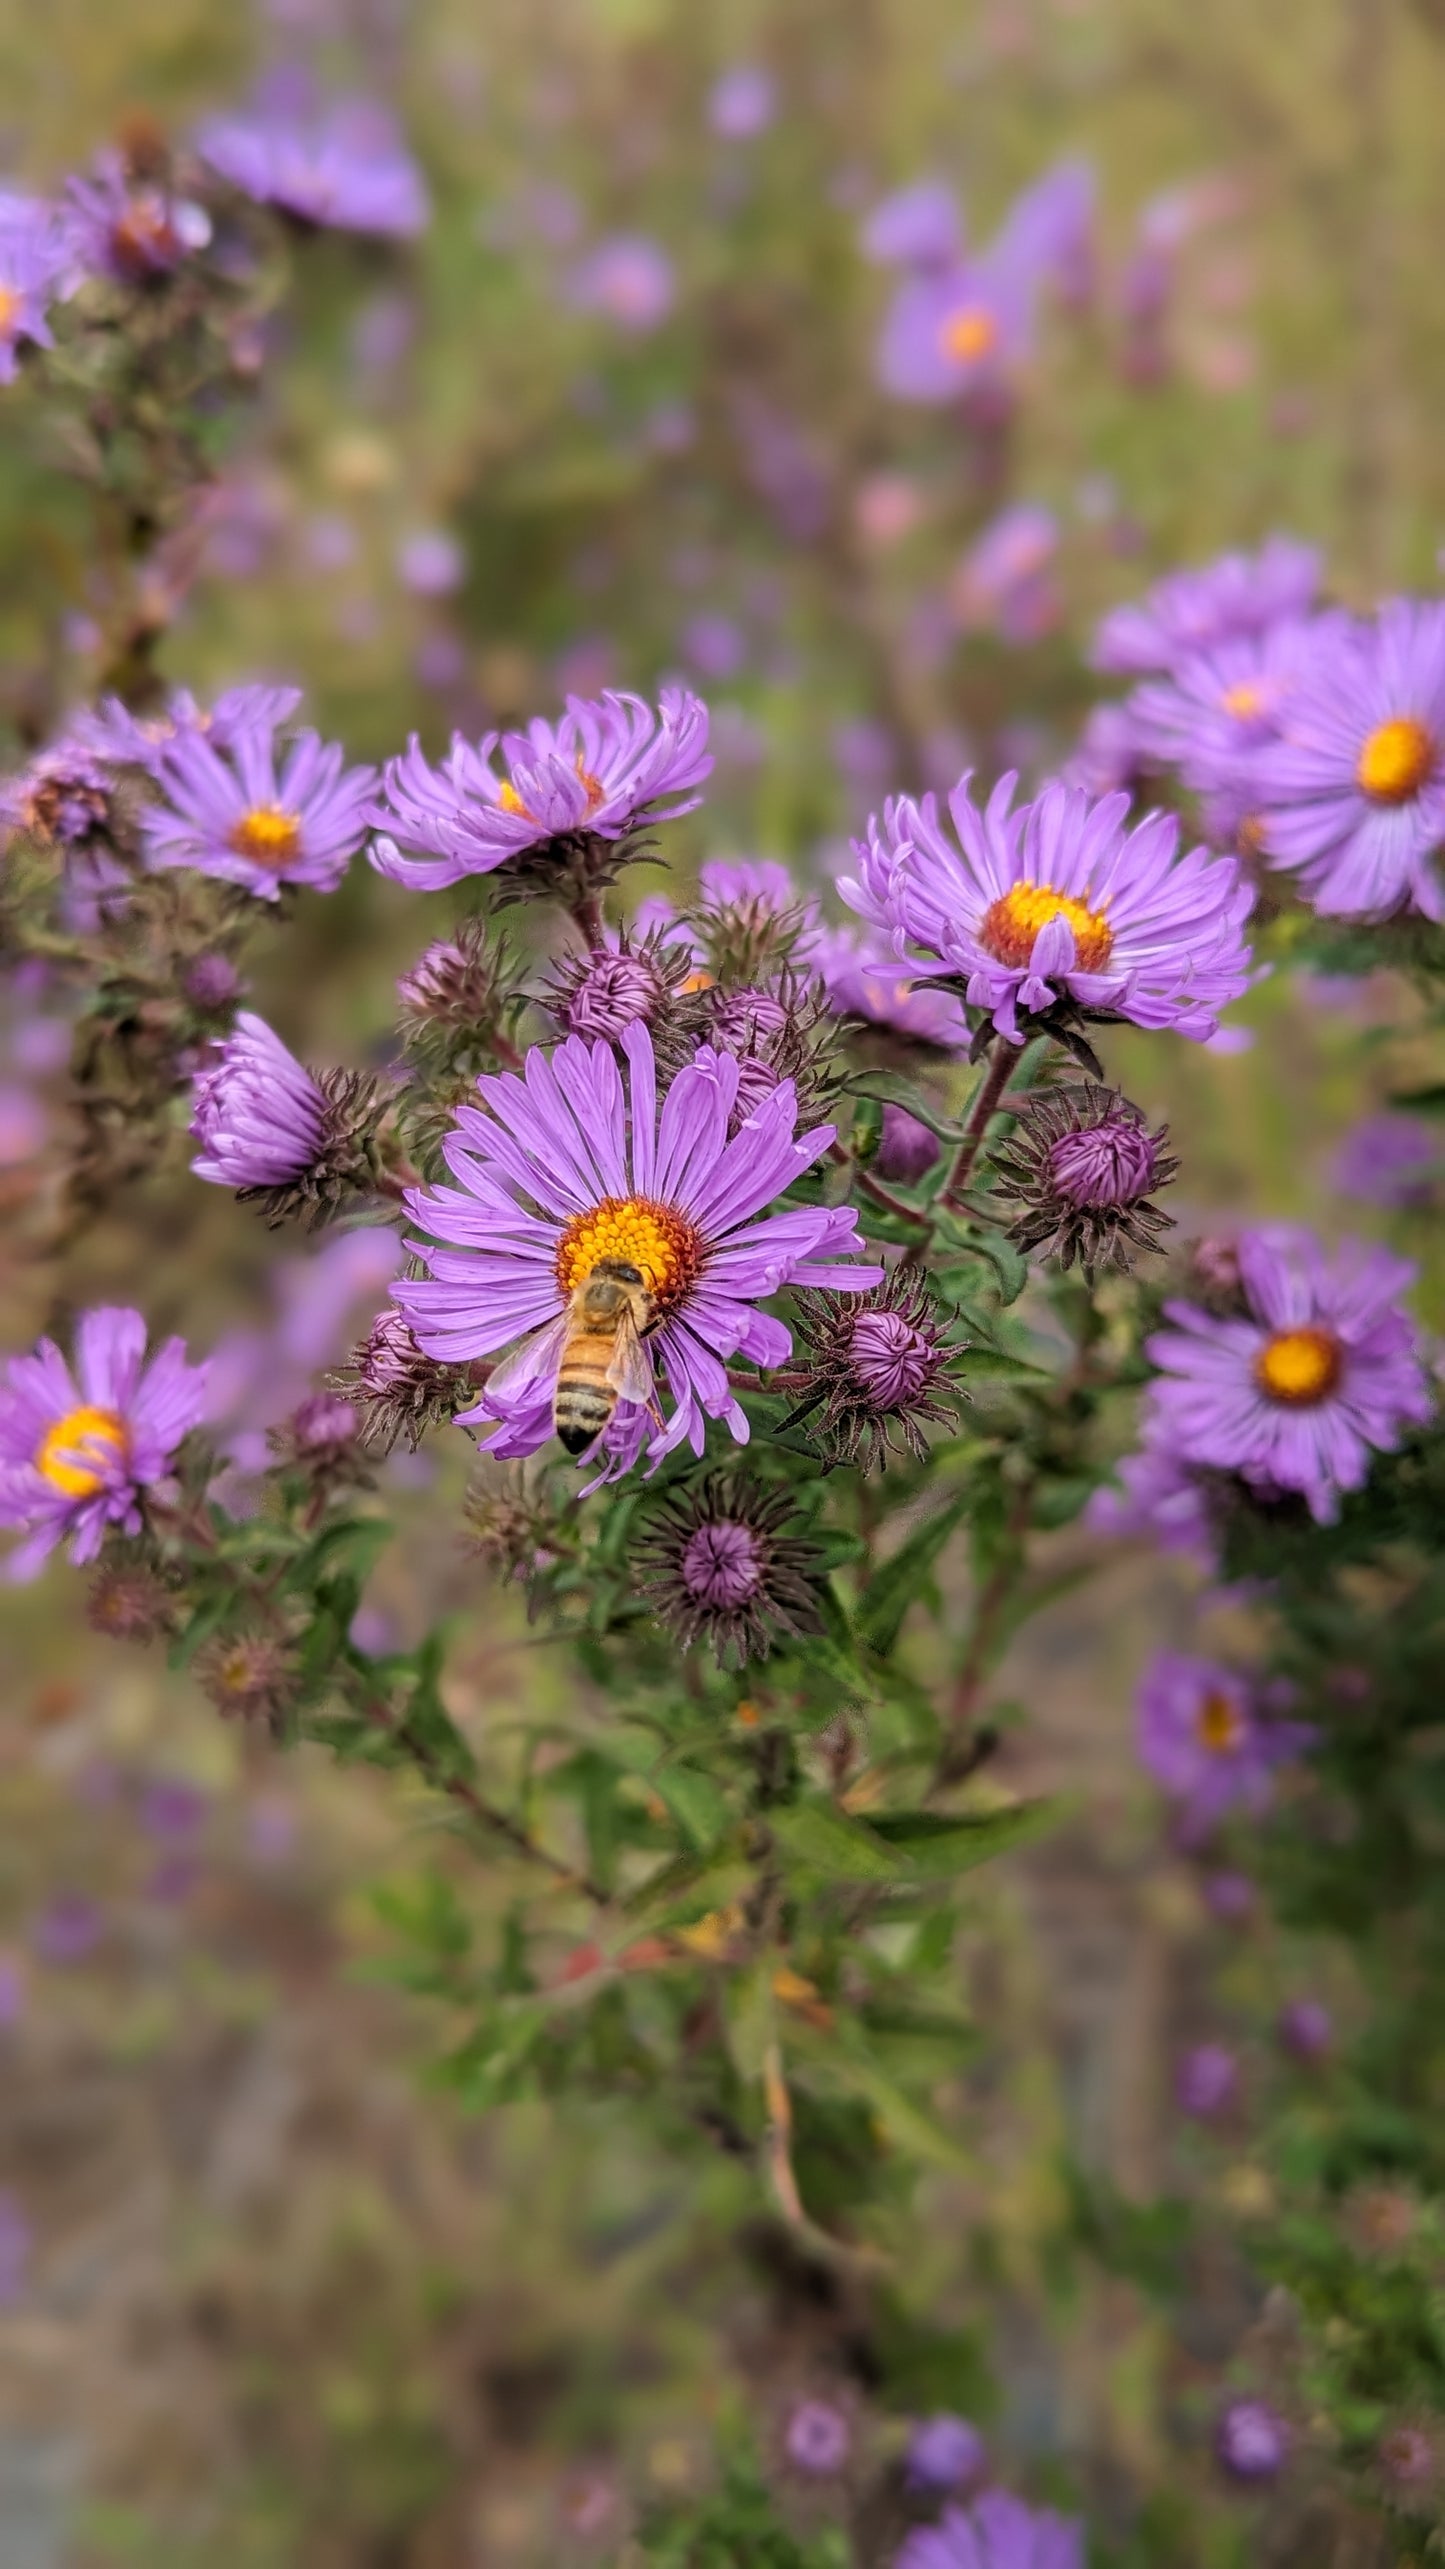 Symphyotrichum novae-angliae - New England Aster with Bee